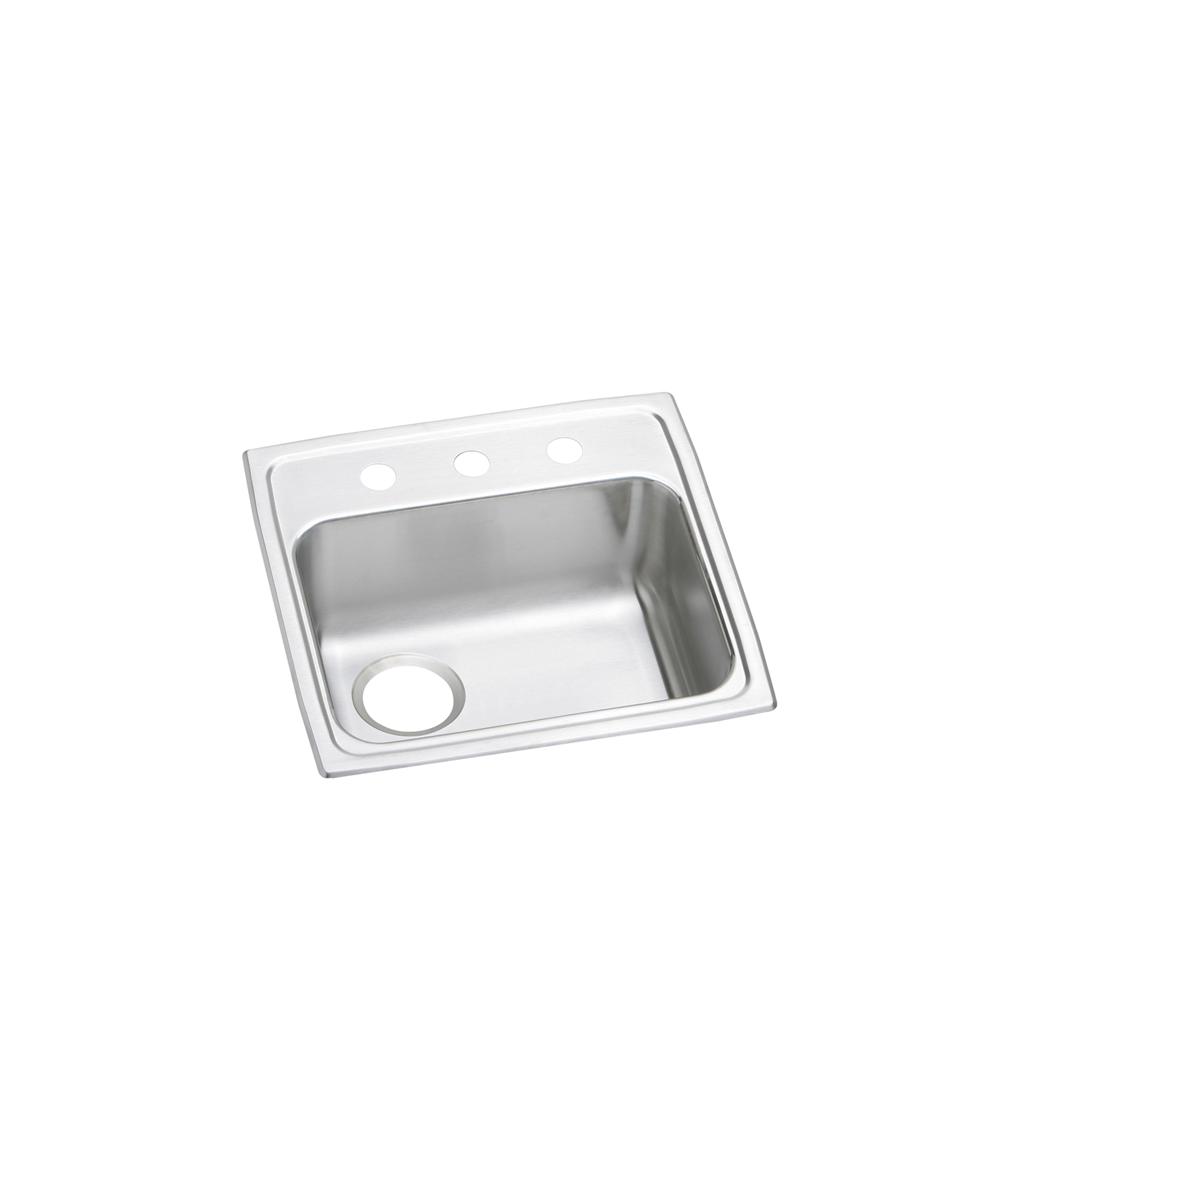 Elkay Lustertone Classic 19" x 18" x 5-1/2" OS4-Hole Single Bowl Drop-in ADA Sink with Left Drain